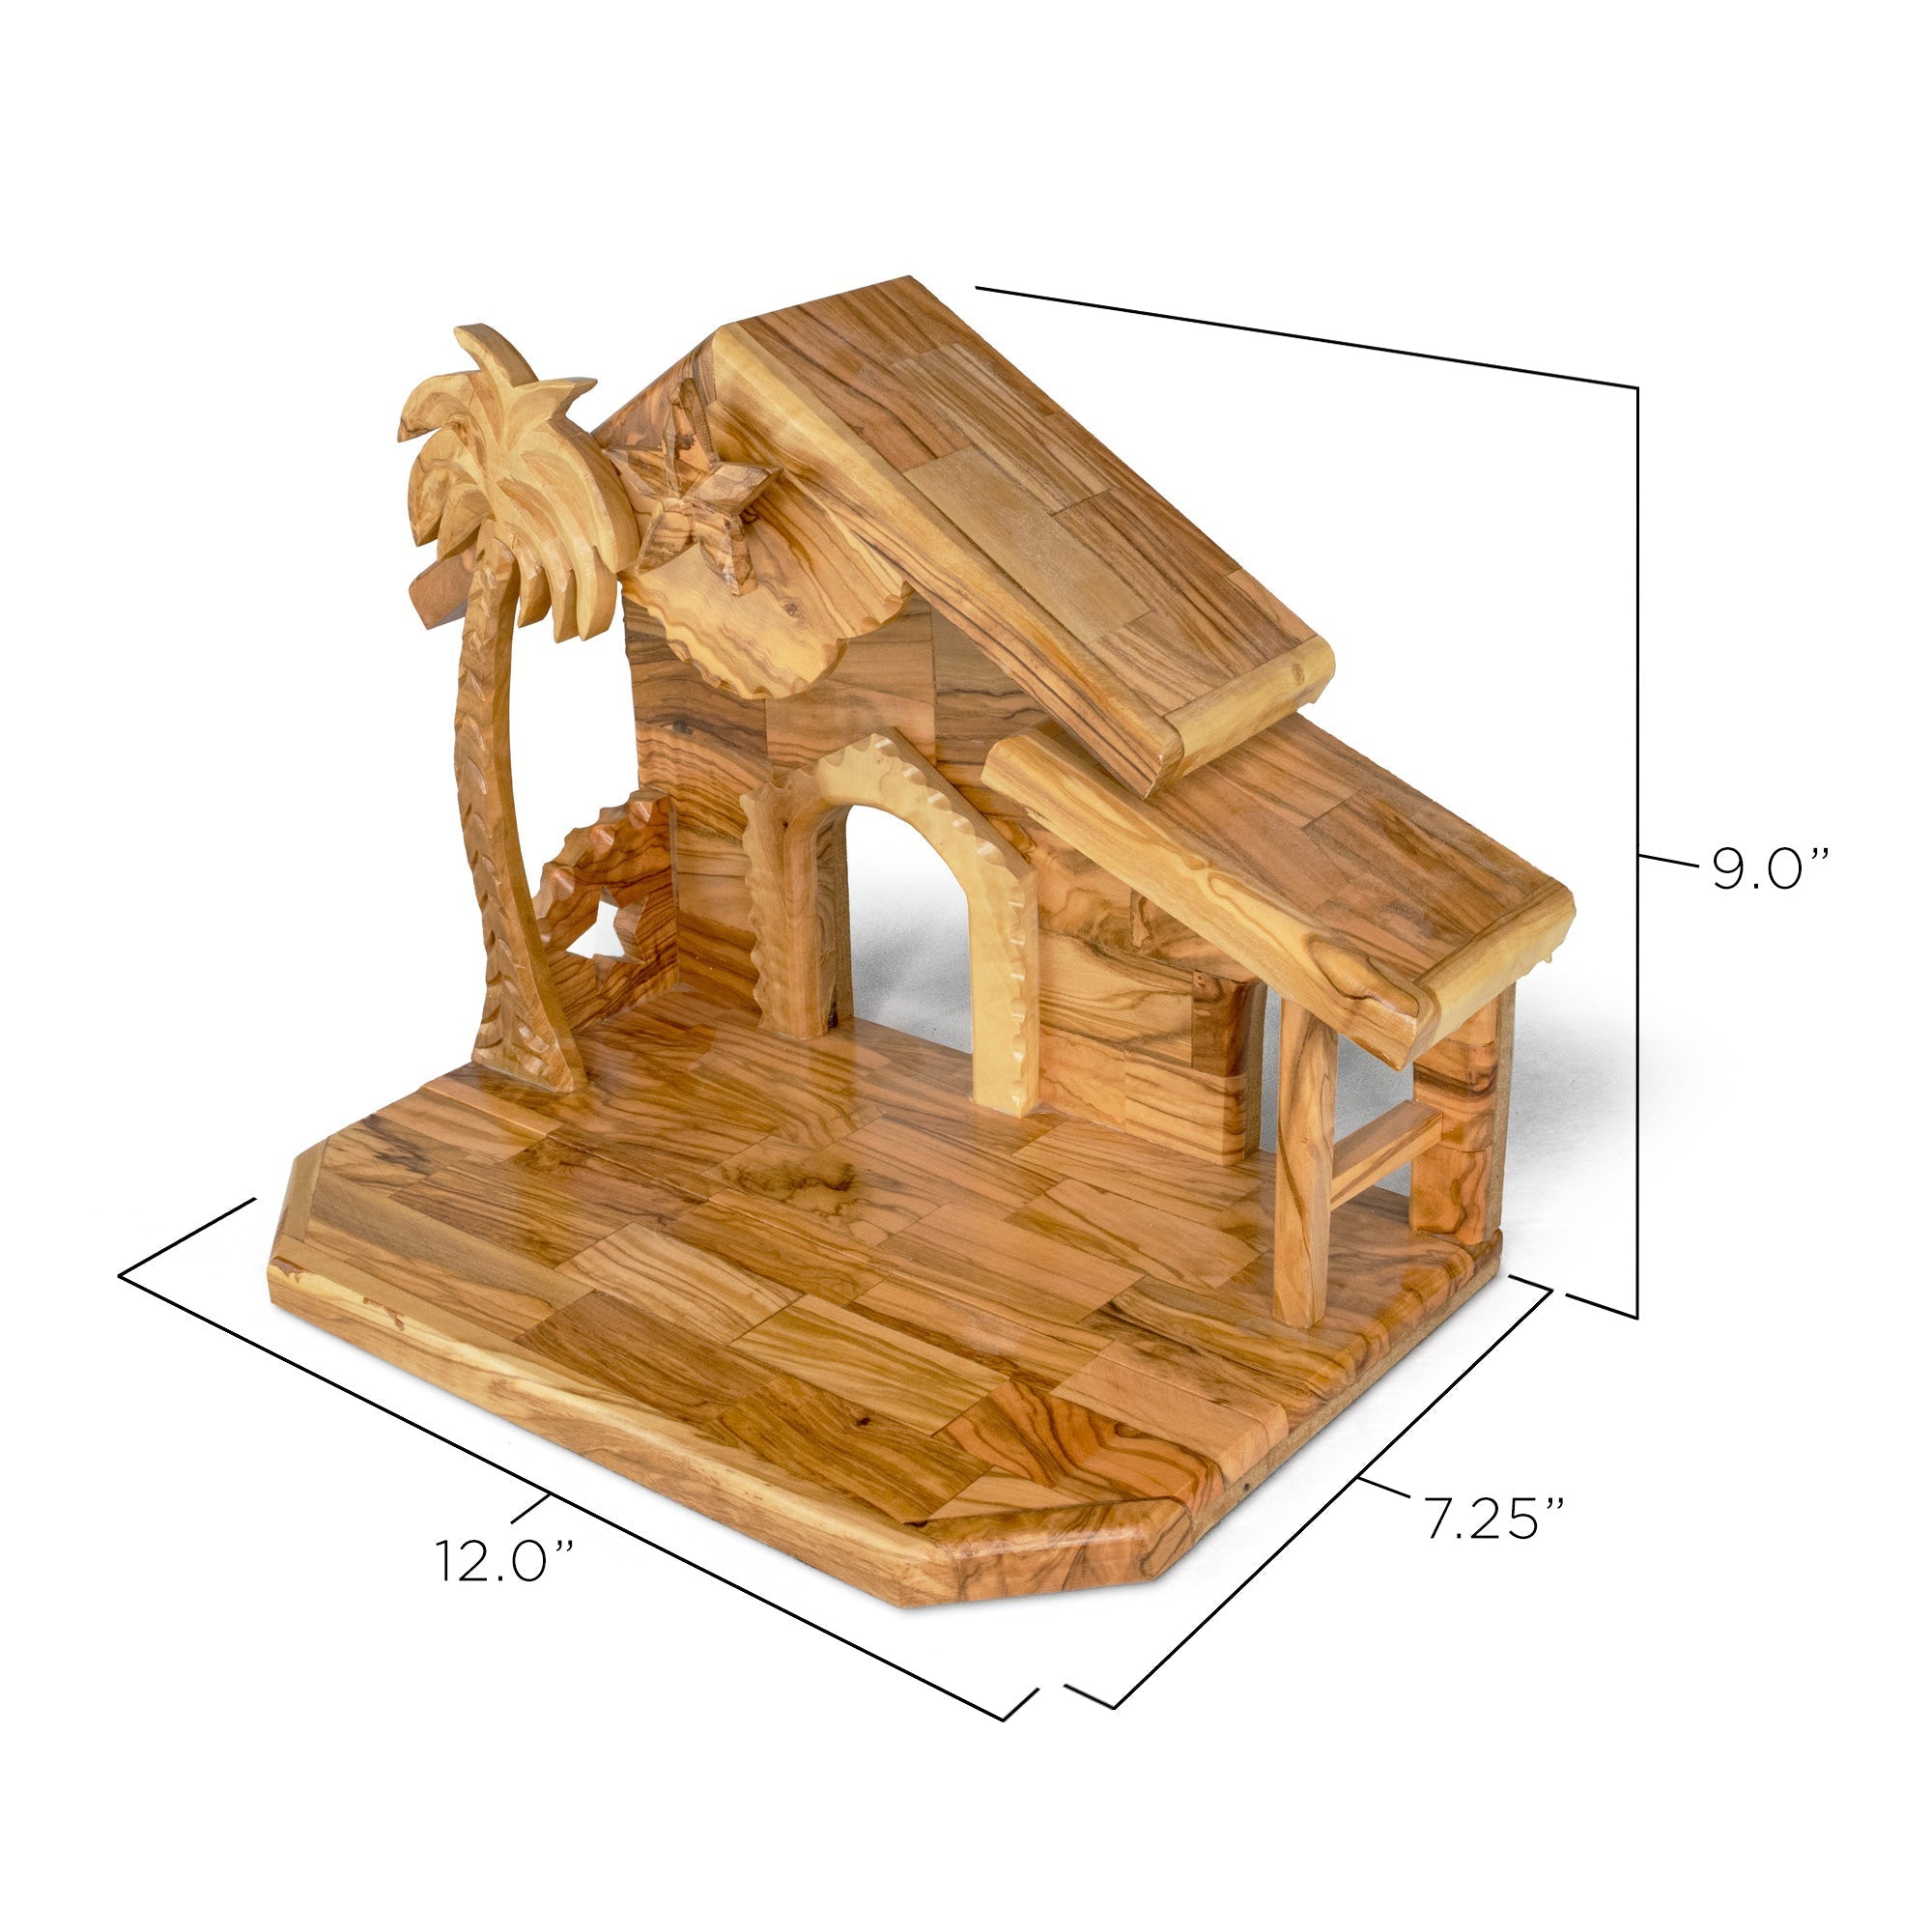 Holy Land Olive Wood Nativity with Medium Stable and Detailed Figurines